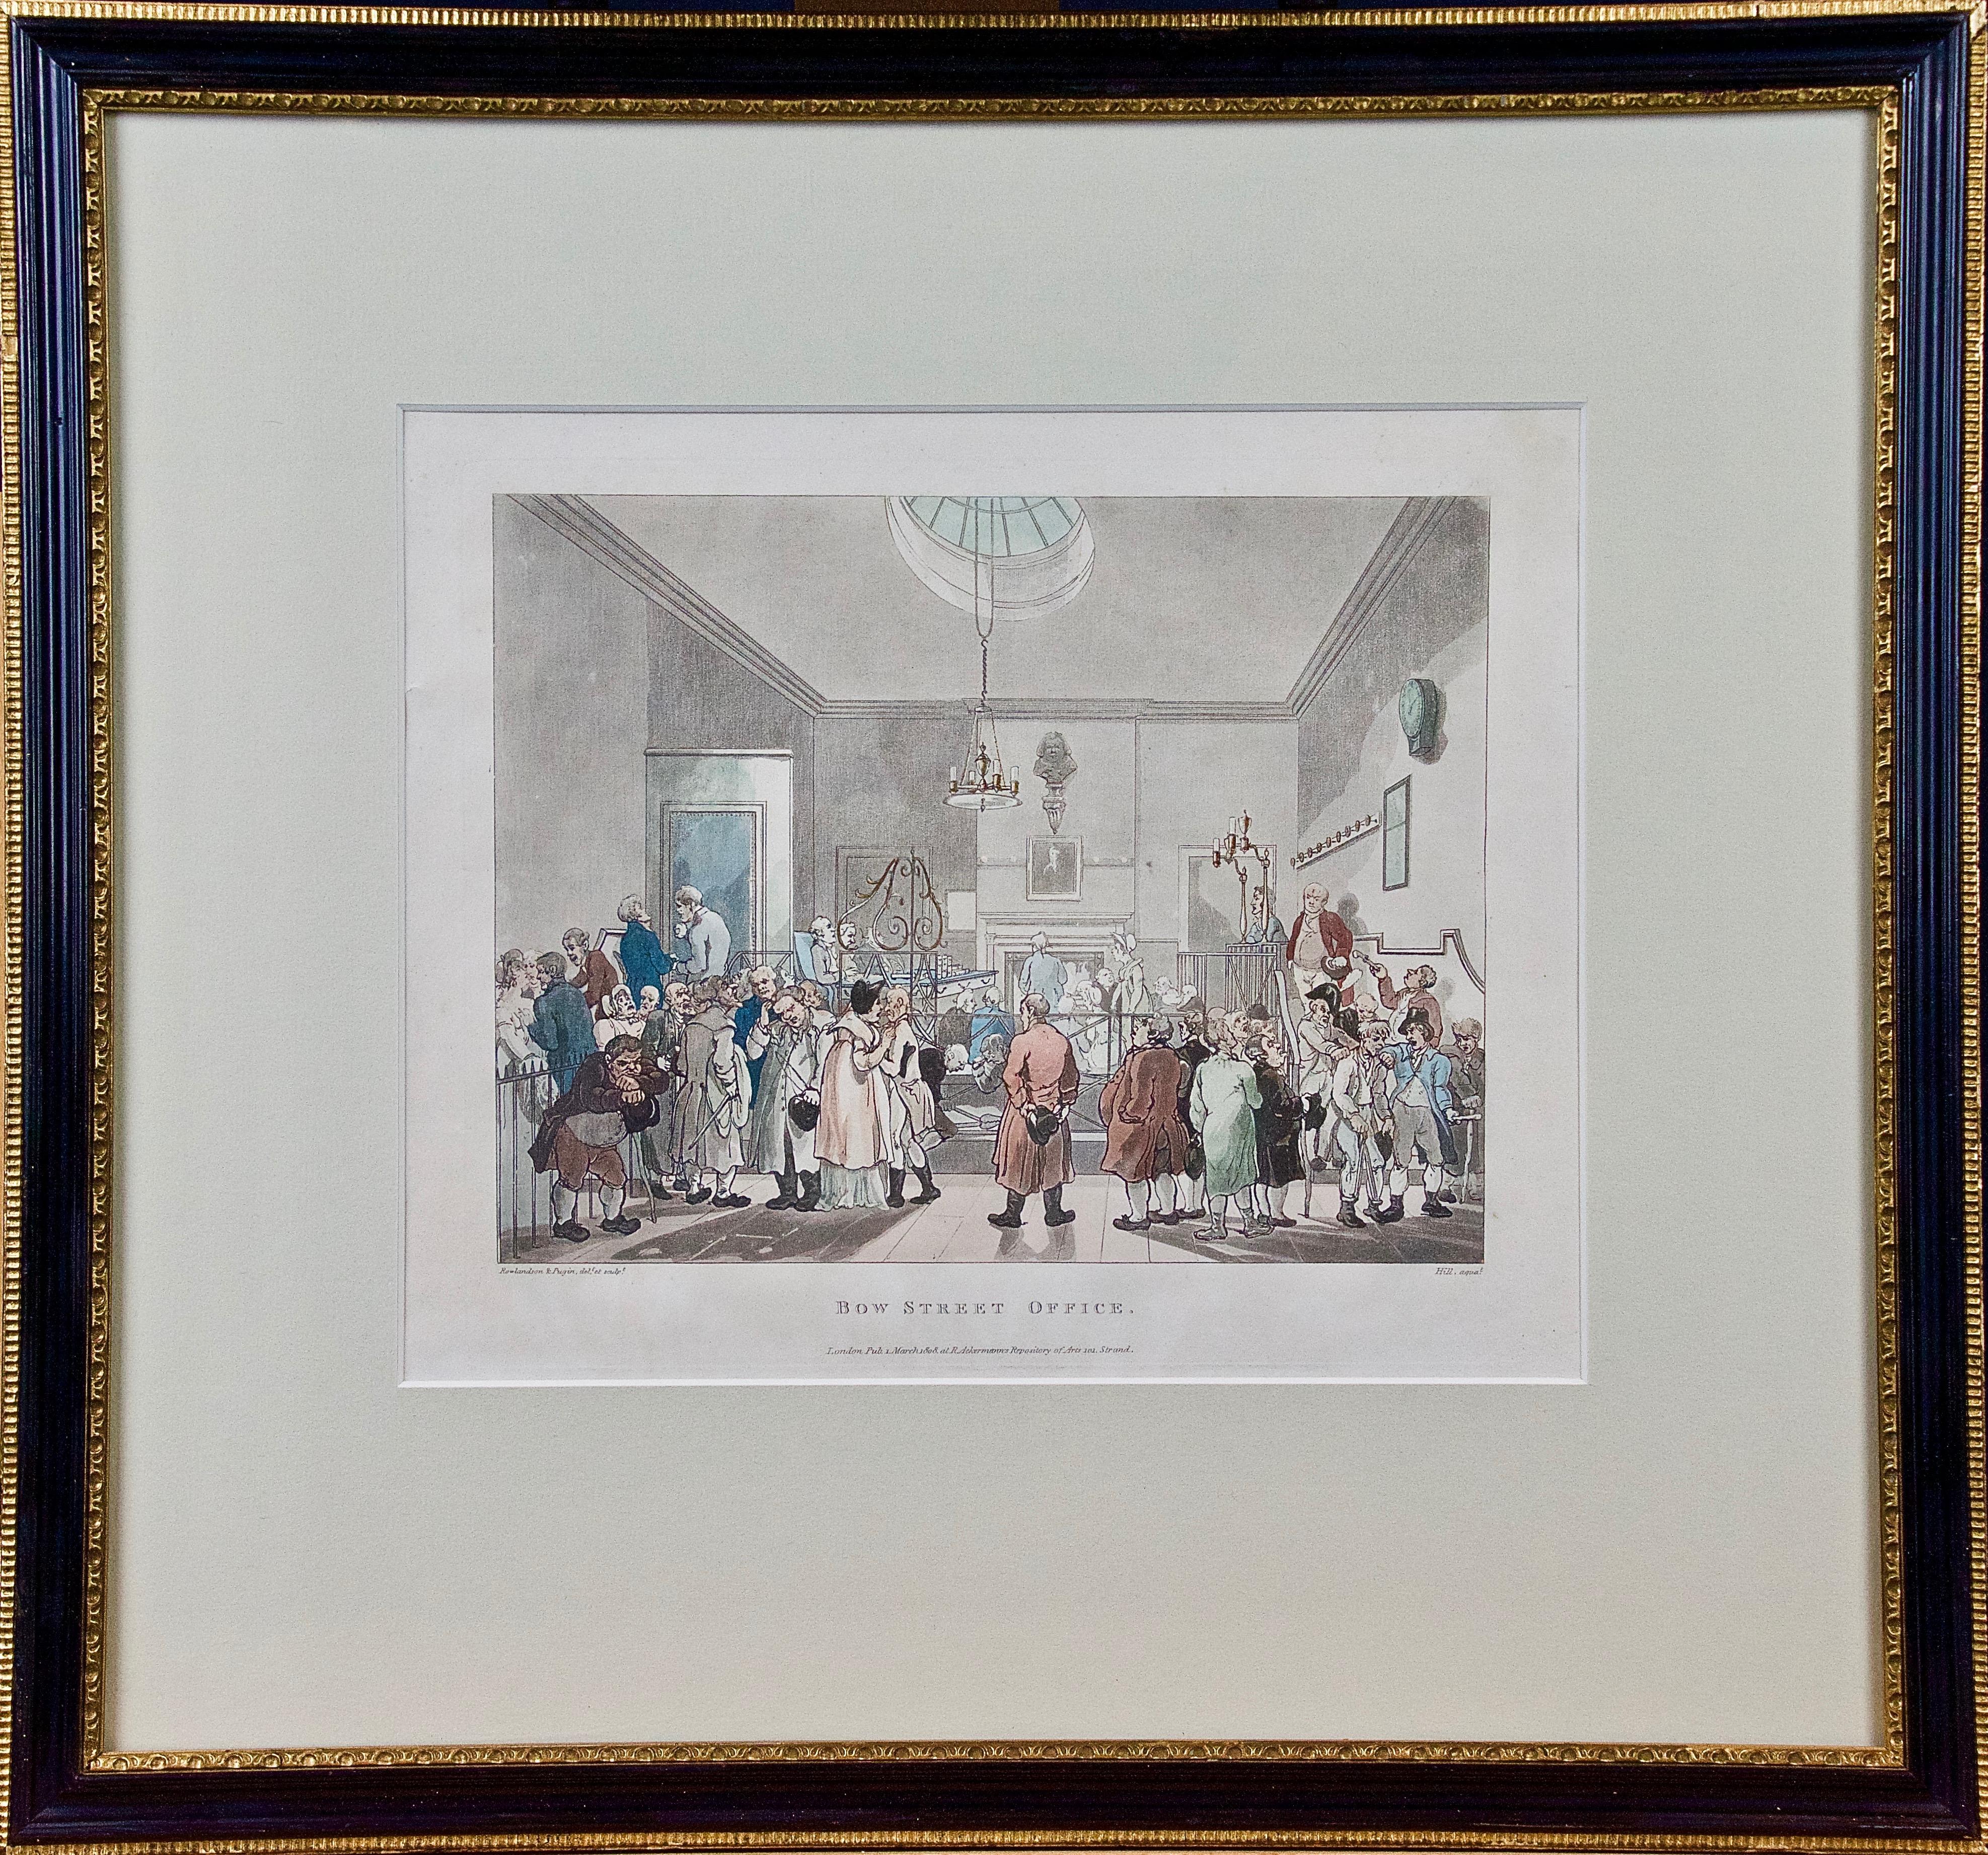 Bow Street Office: Rowlandson Hand-colored Engraving from Microcosm of London 